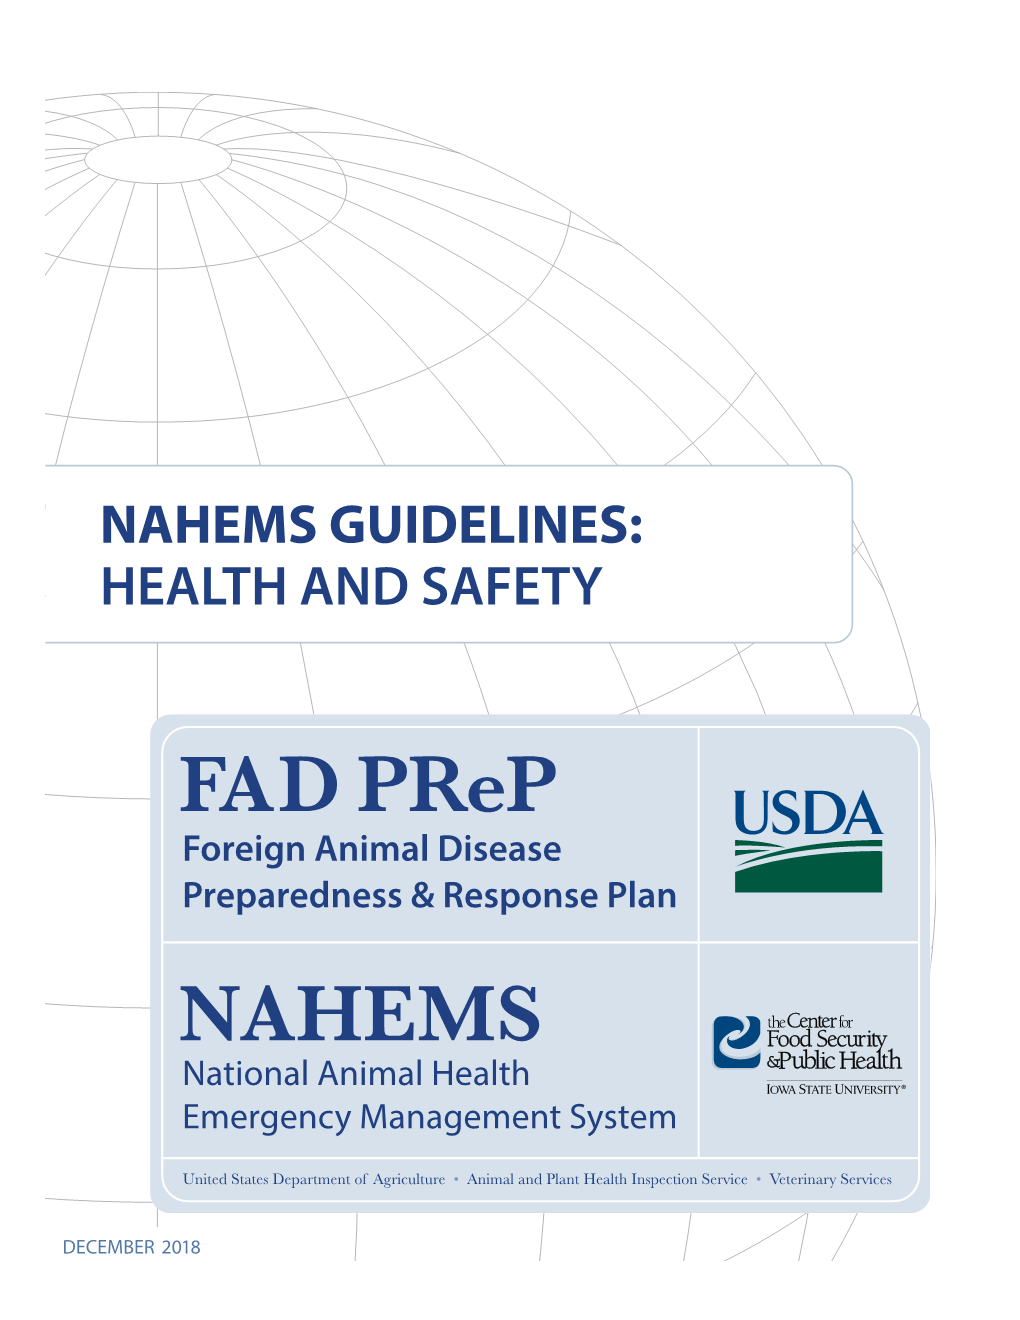 FAD Prep/NAHEMS Guidelines: Health and Safety 2018” Is the Result of a Content Update to the FAD Prep/NAHEMS Guidelines: Health and Safety 2011